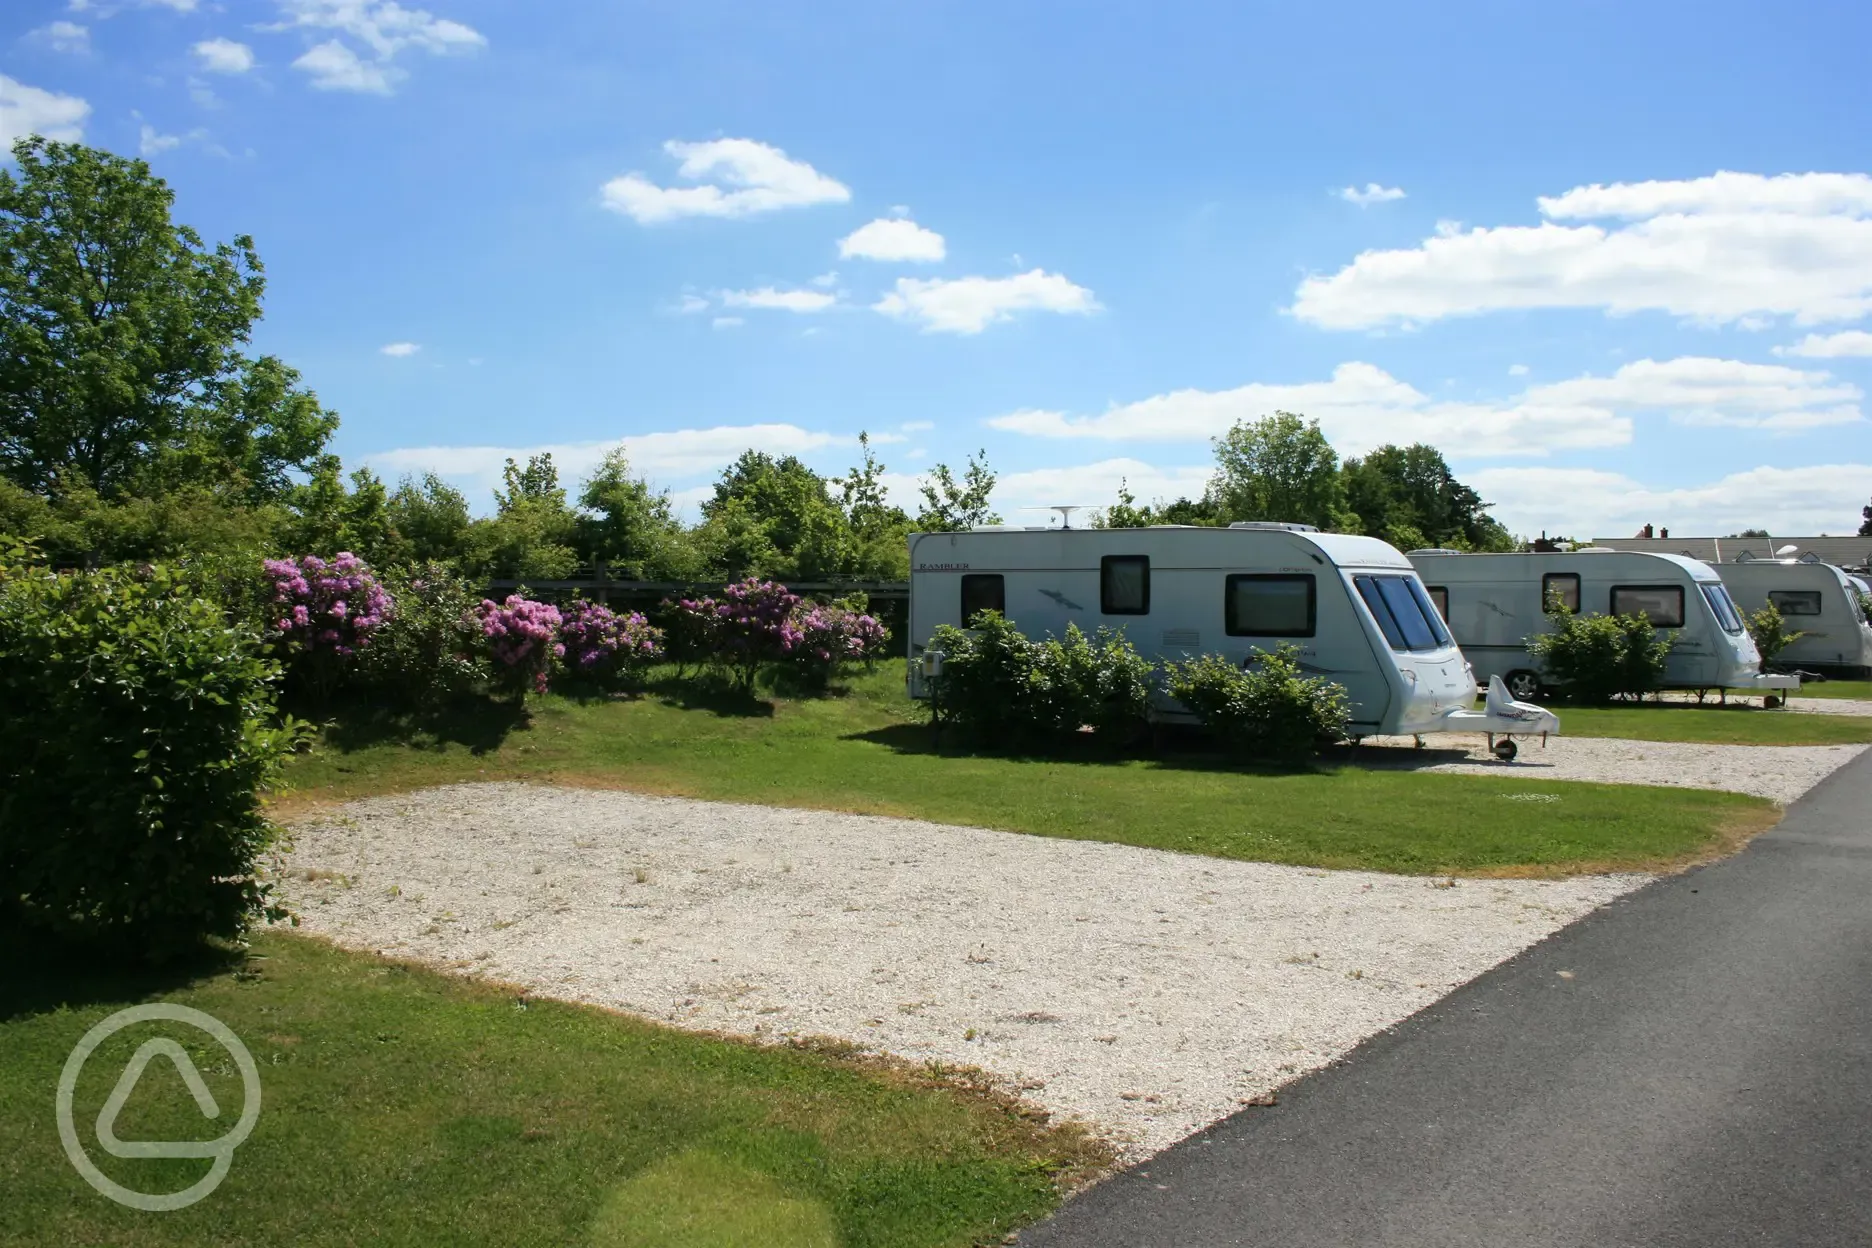 Jacobs Mount Caravan and Camping Park